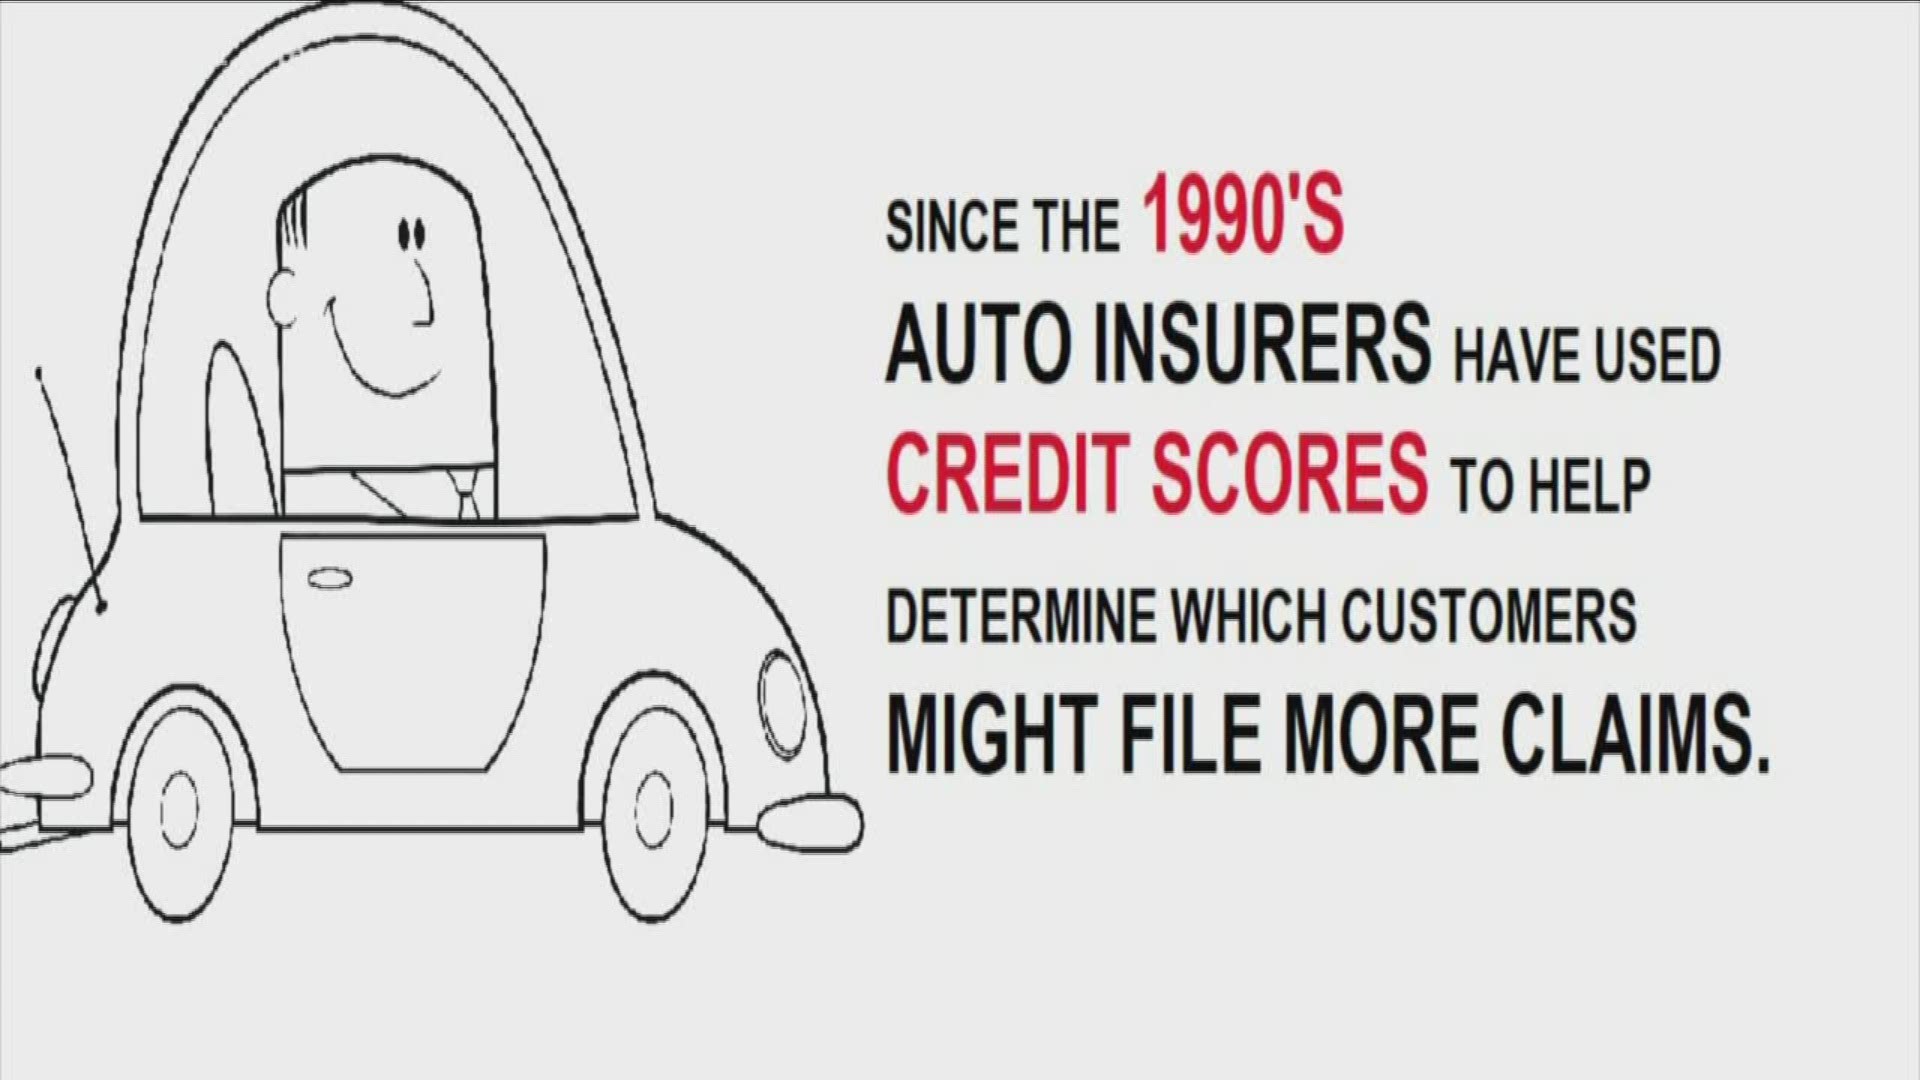 Since the 1990s auto insurers have used your credit score to help estimate which customers might file more claims then others. Four states have made this practice illegal. North Carolina is not one of them.